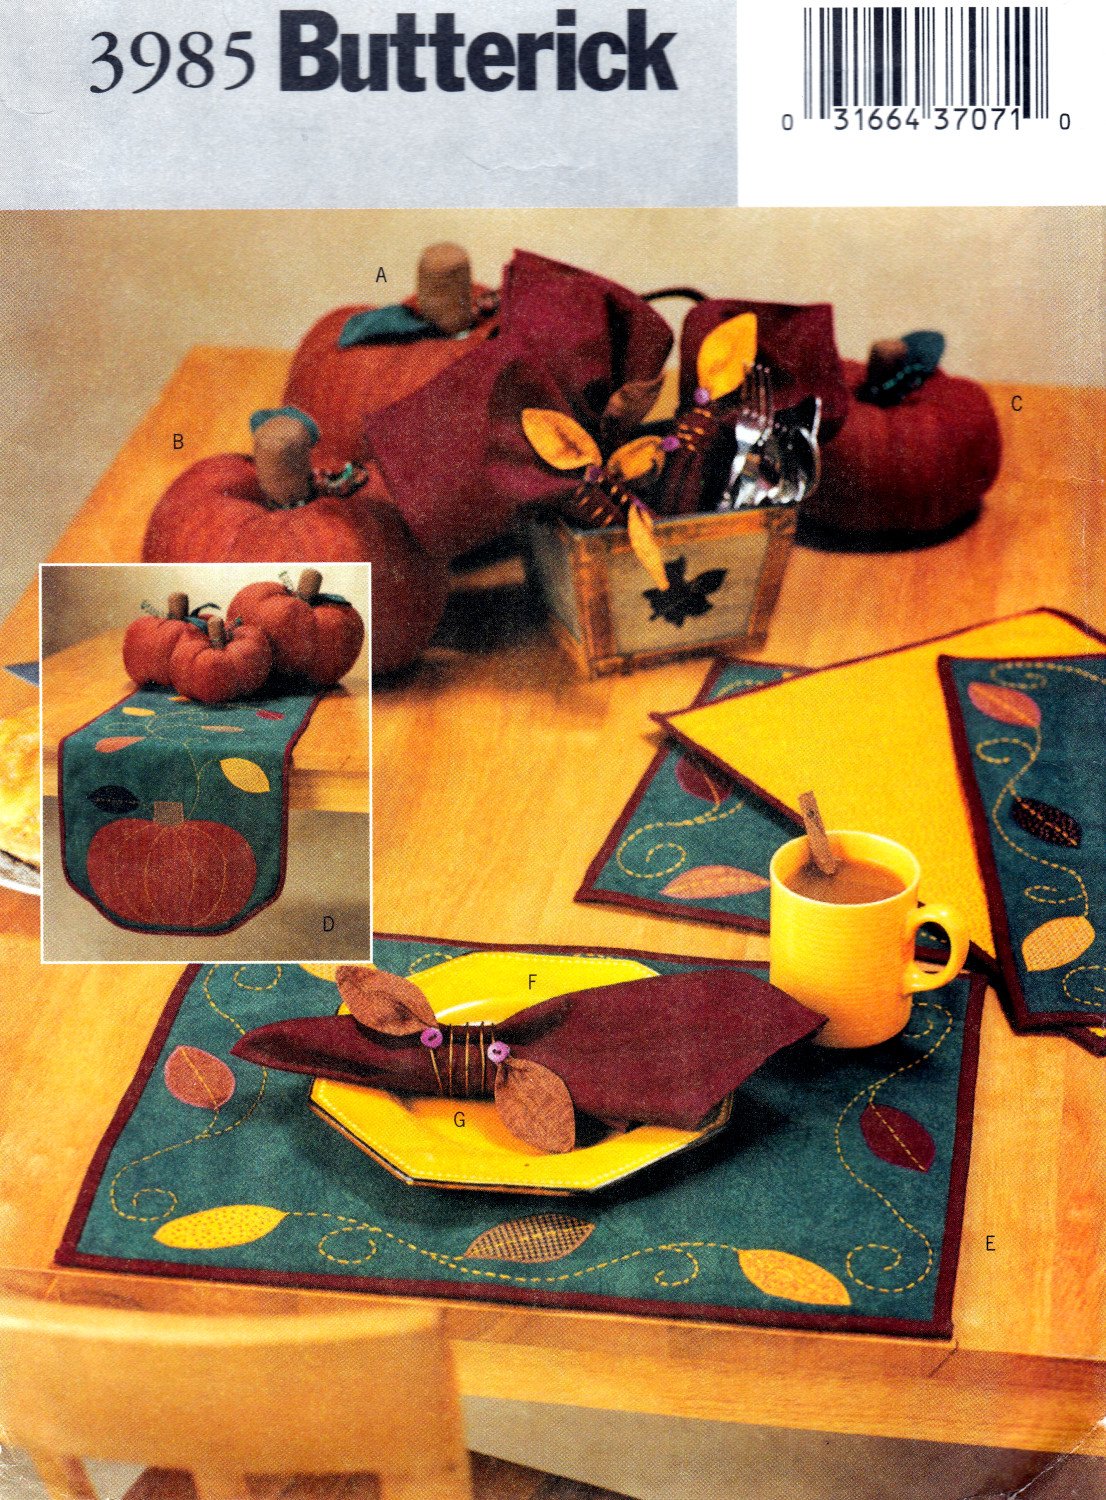 Butterick 3985 Fall Table Top Runner Placemats Napkins Sewing Pattern Sizes OSZ